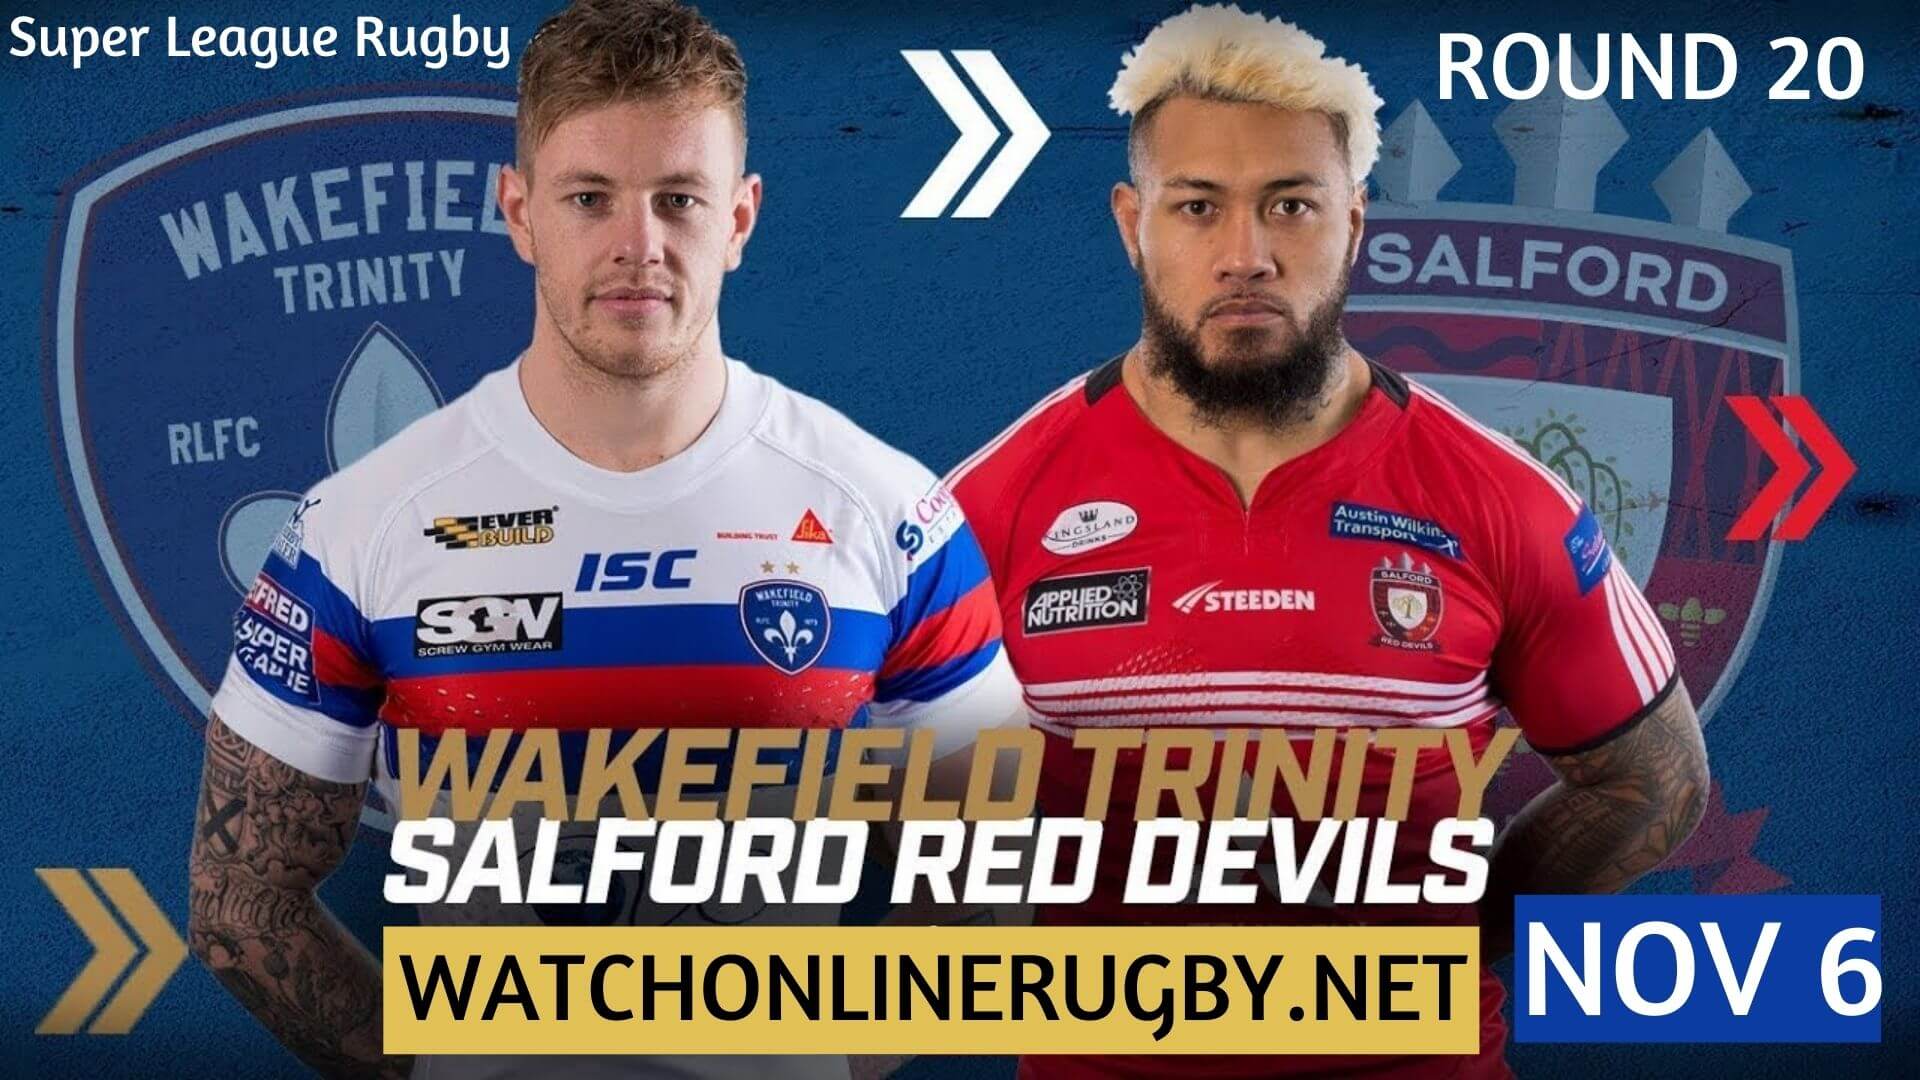 Wakefield Trinity Vs Salford Red Devil Super League Rugby 2020